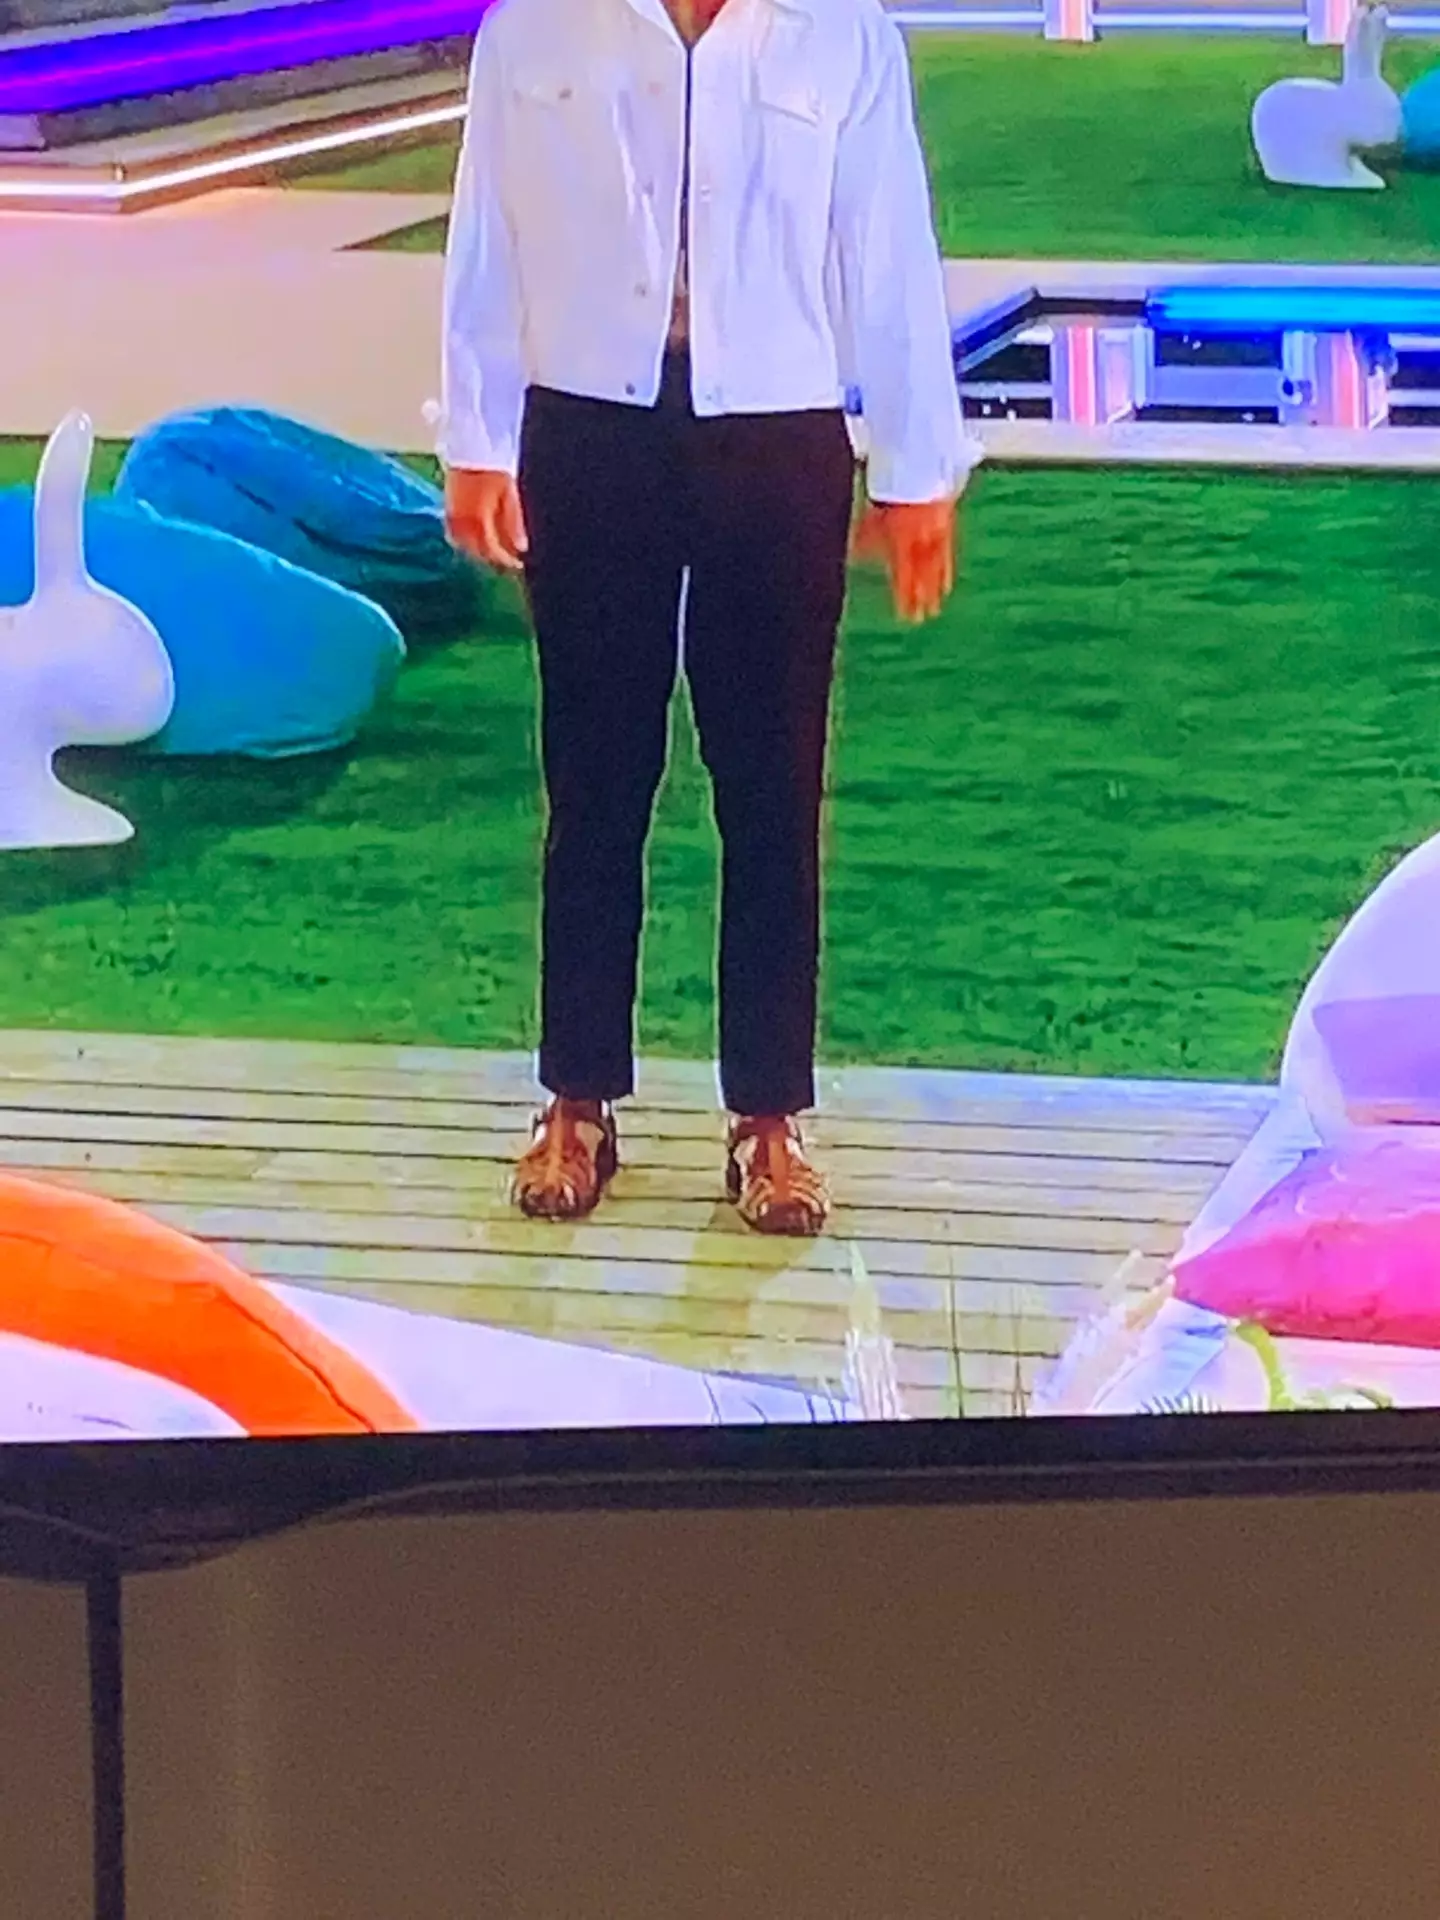 Brett served up a socks and sandals look in Monday's episode (